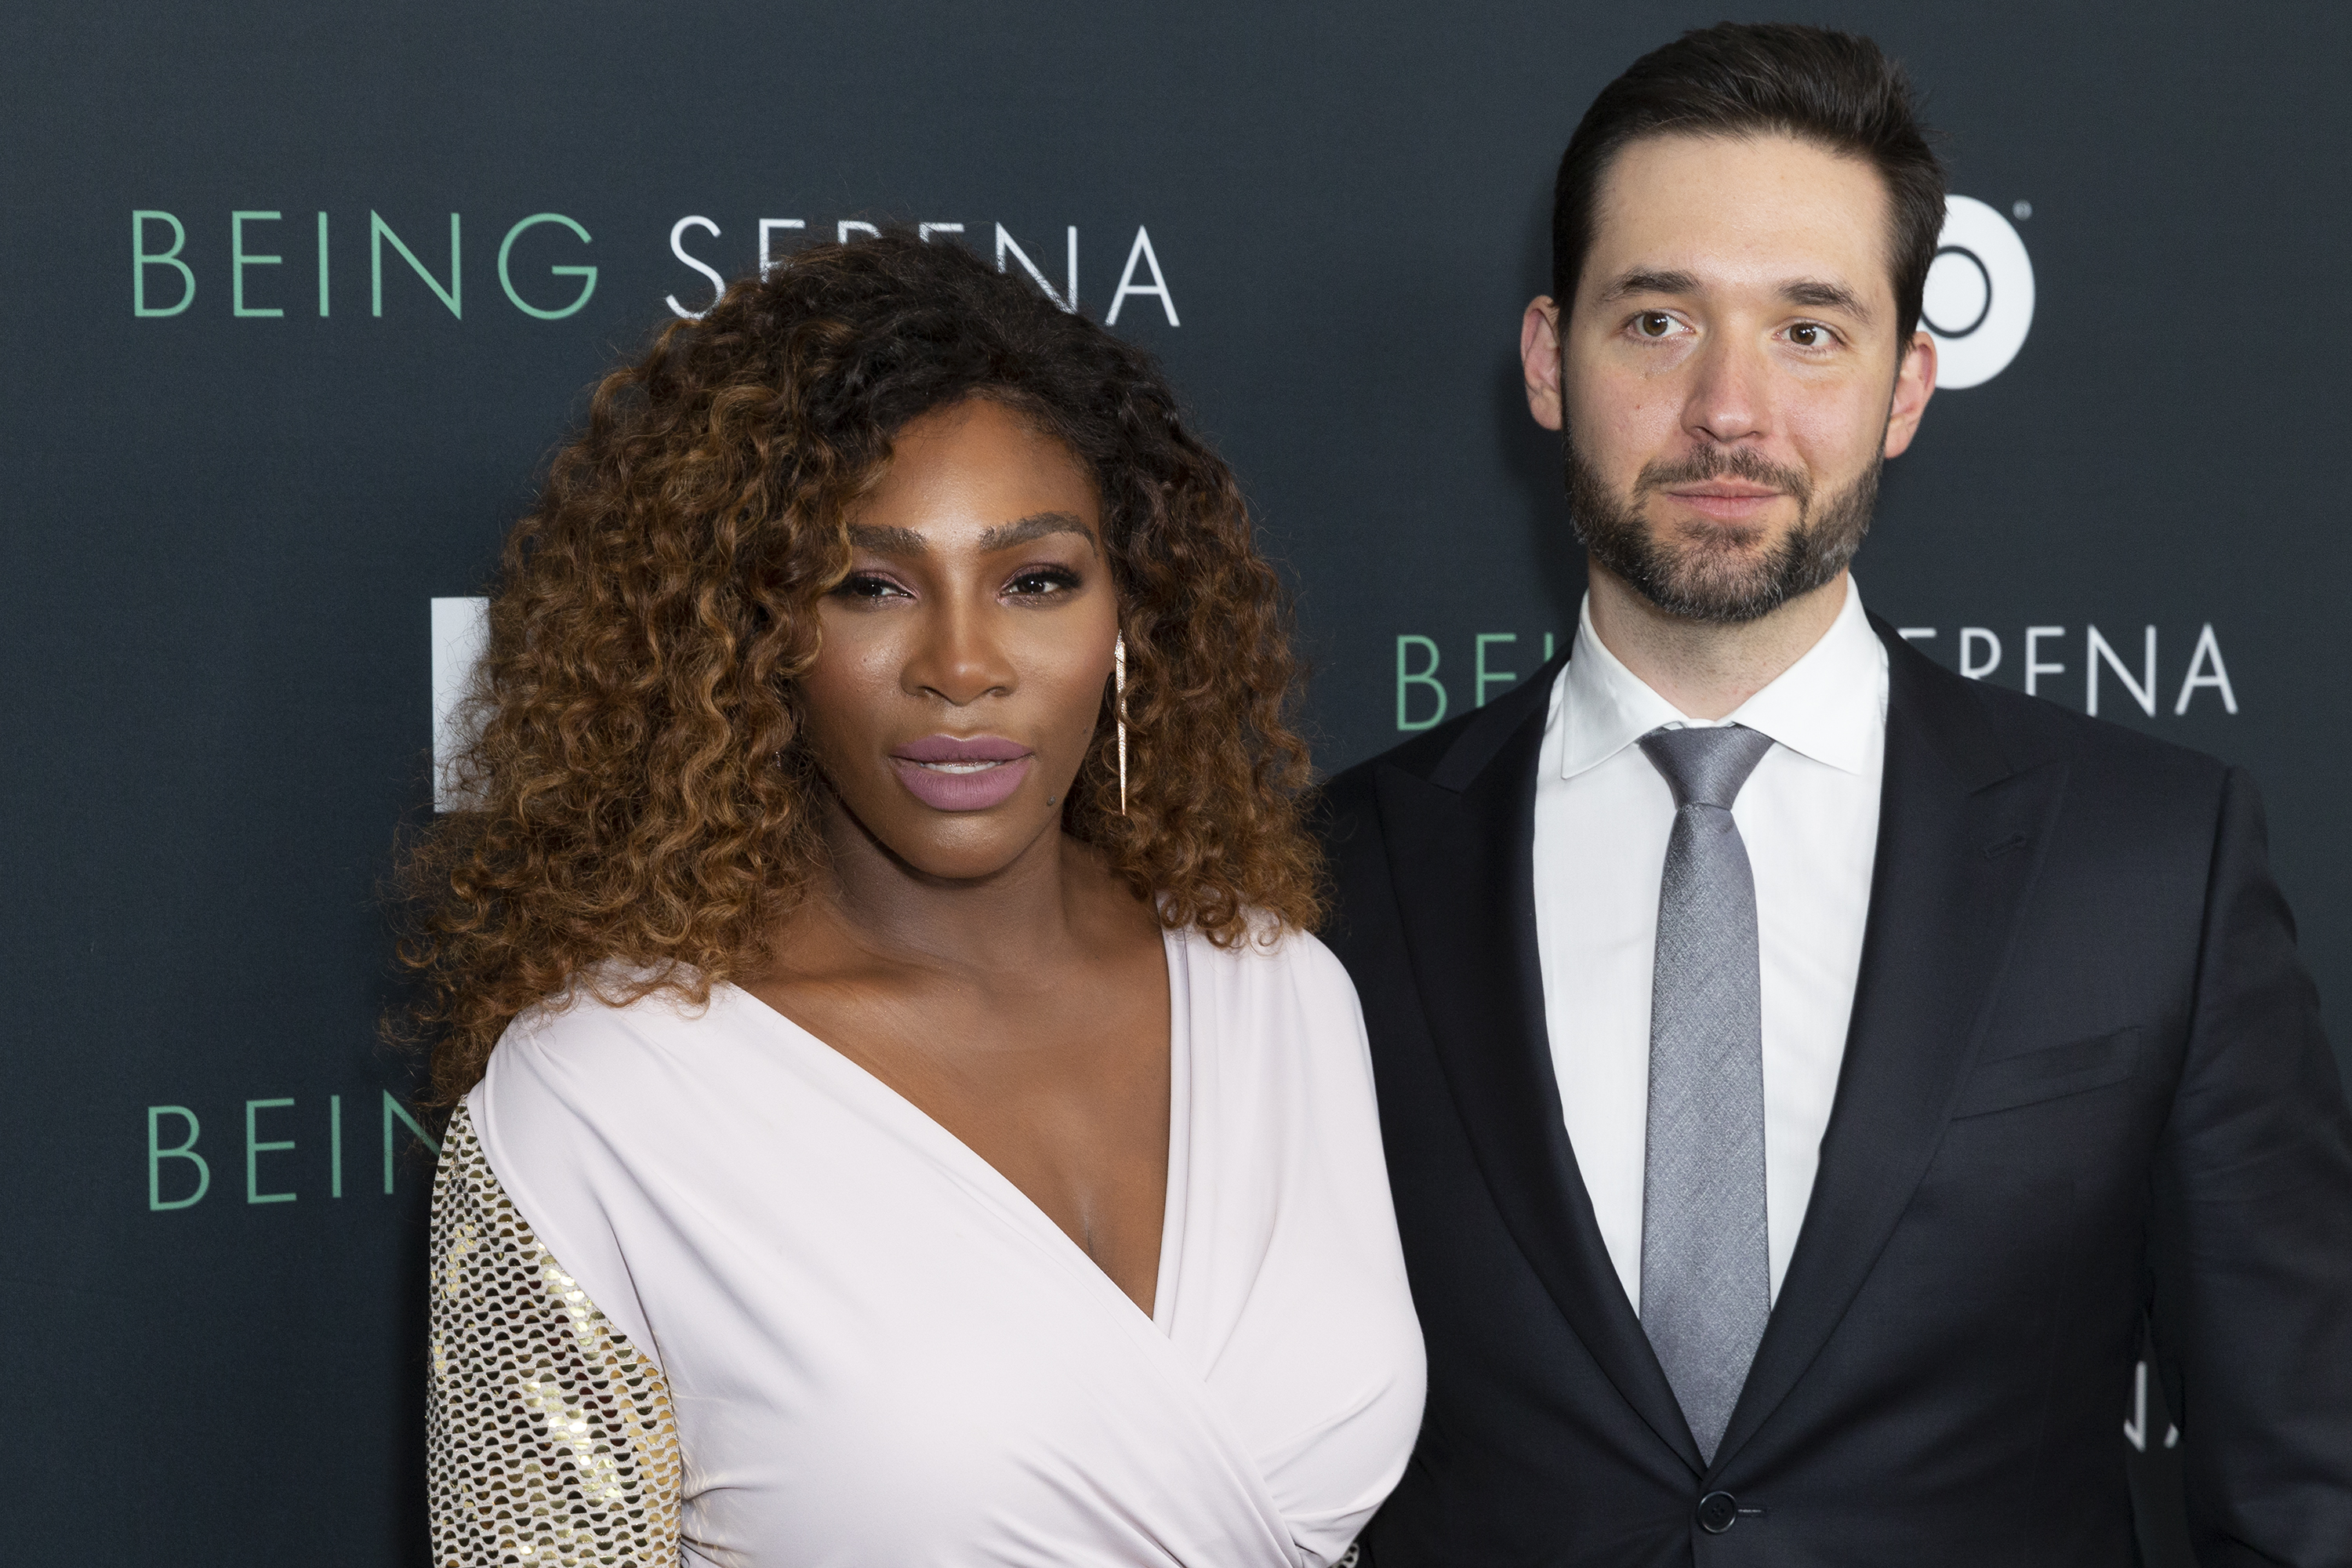 Alexis Ohanian Posts Heartfelt Tribute To Serena Williams Ahead Of Final